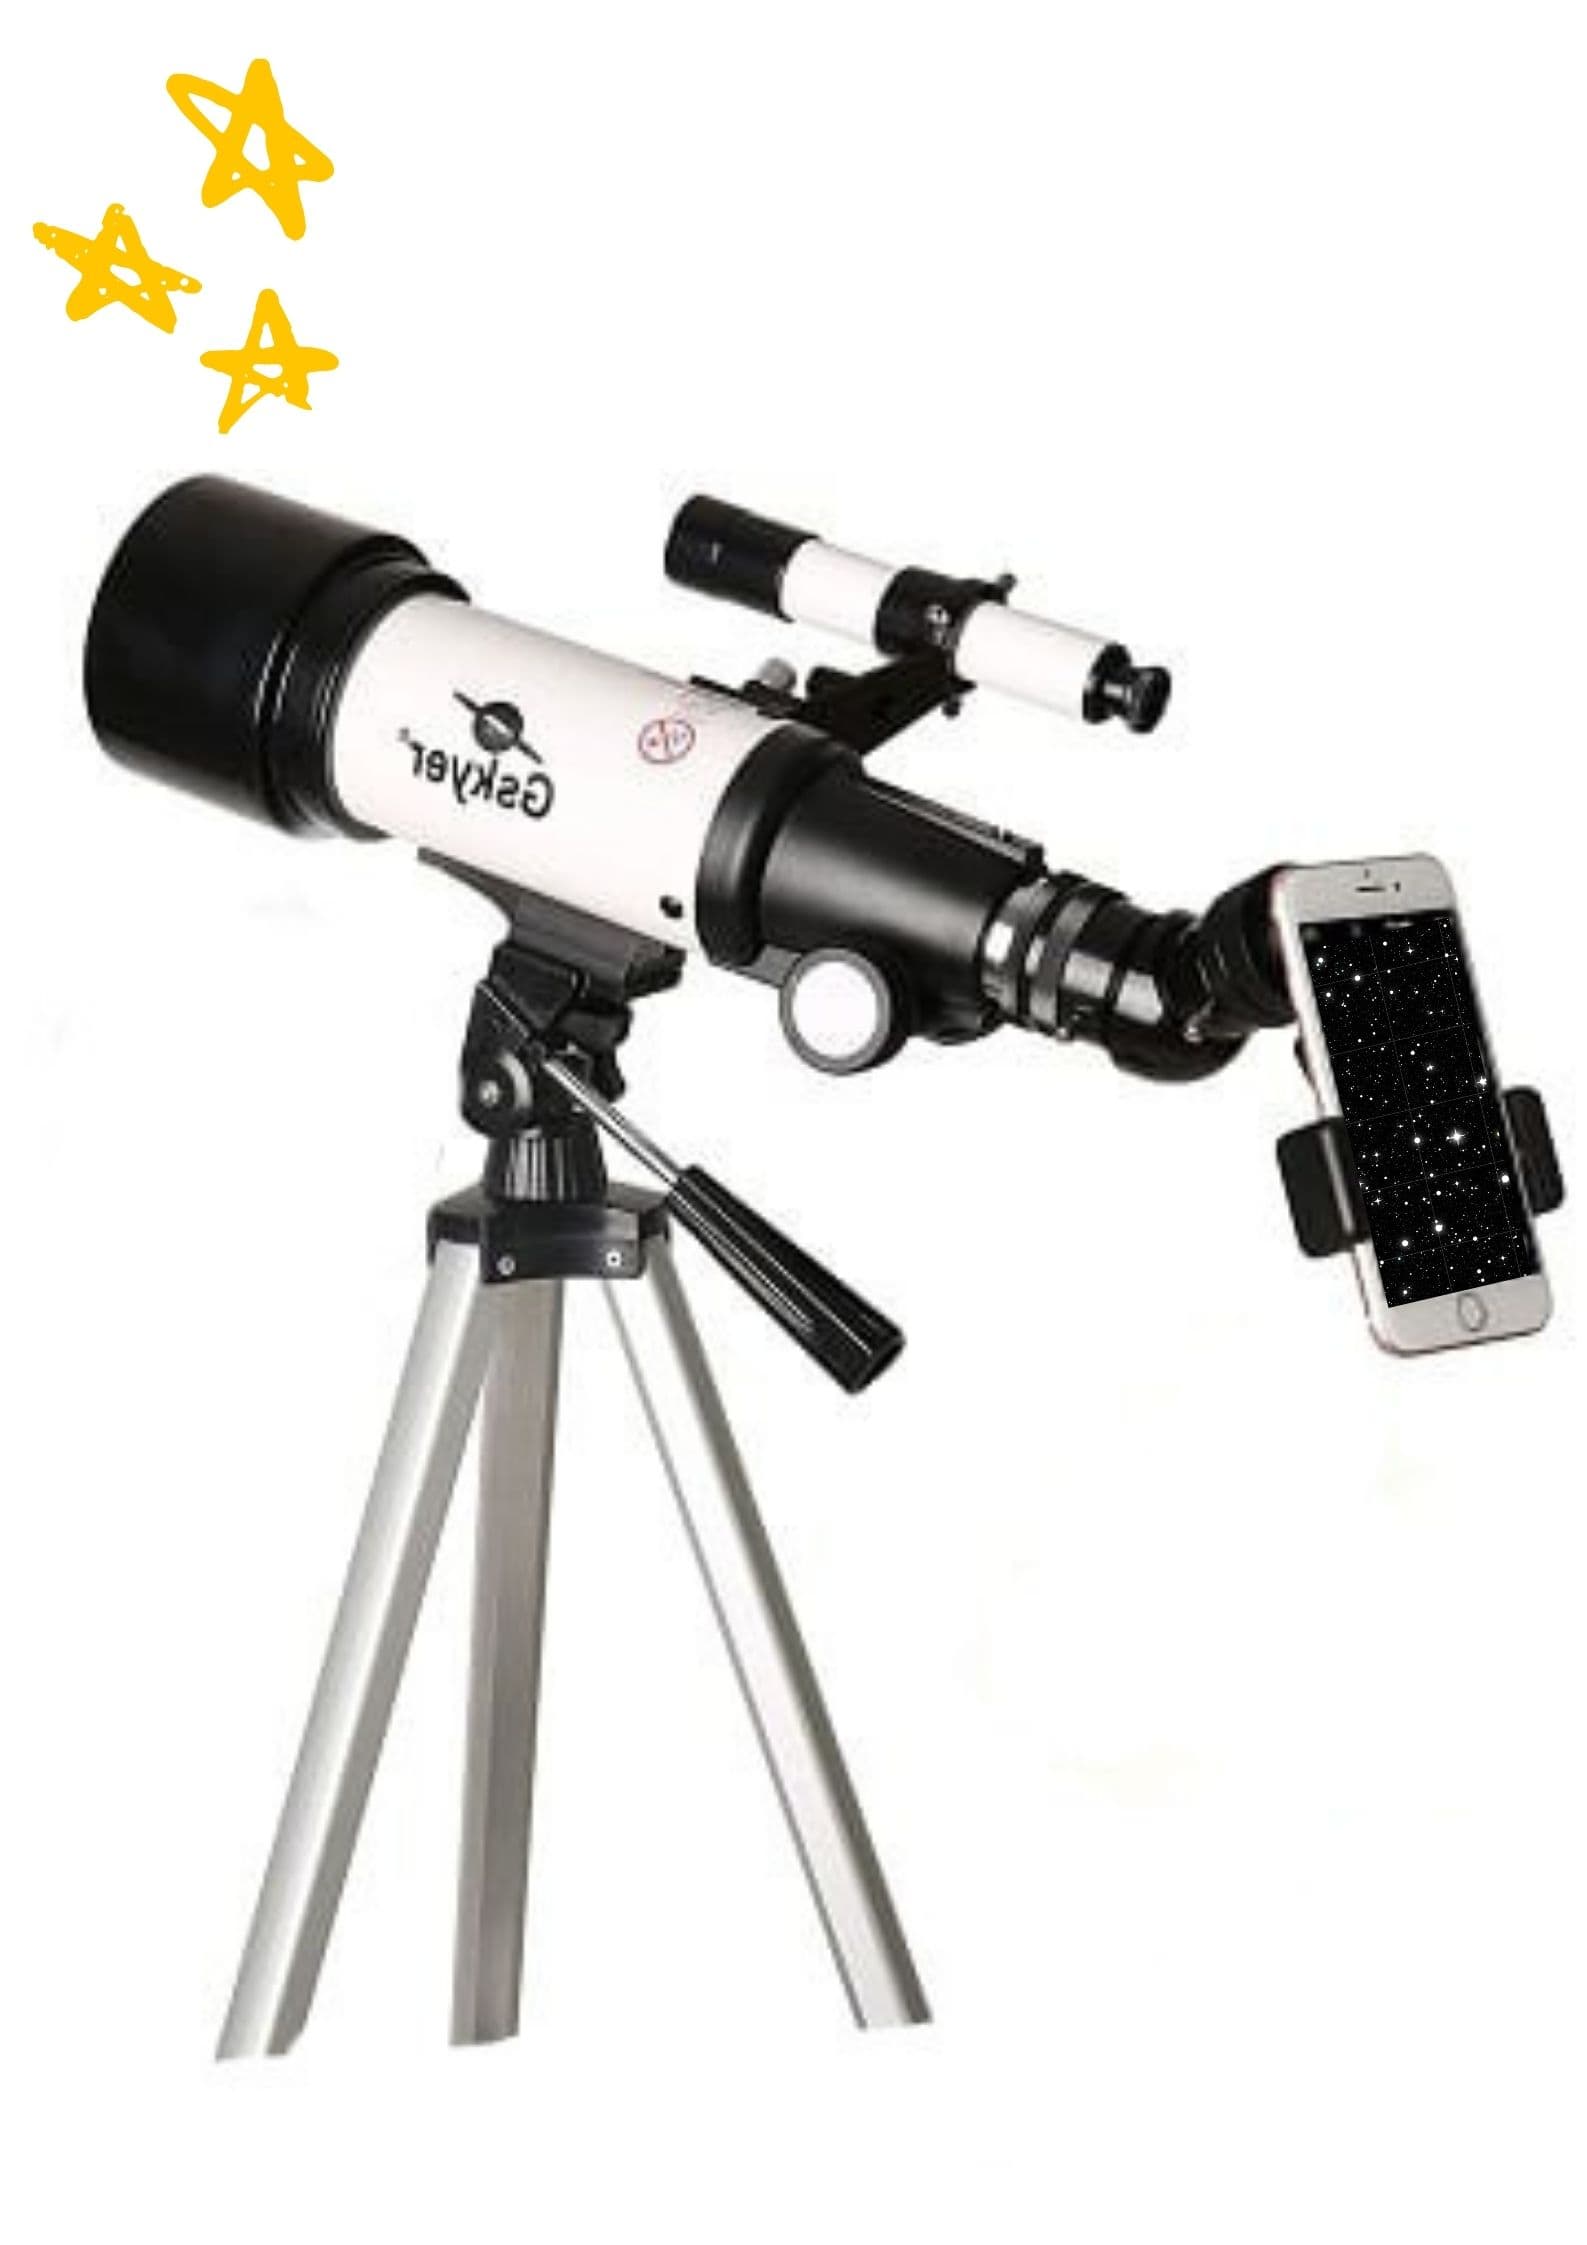 Best Telescope For Viewing Planets & Galaxies: Planet Viewing Doesn’t Have To Be Expensive 2023 9